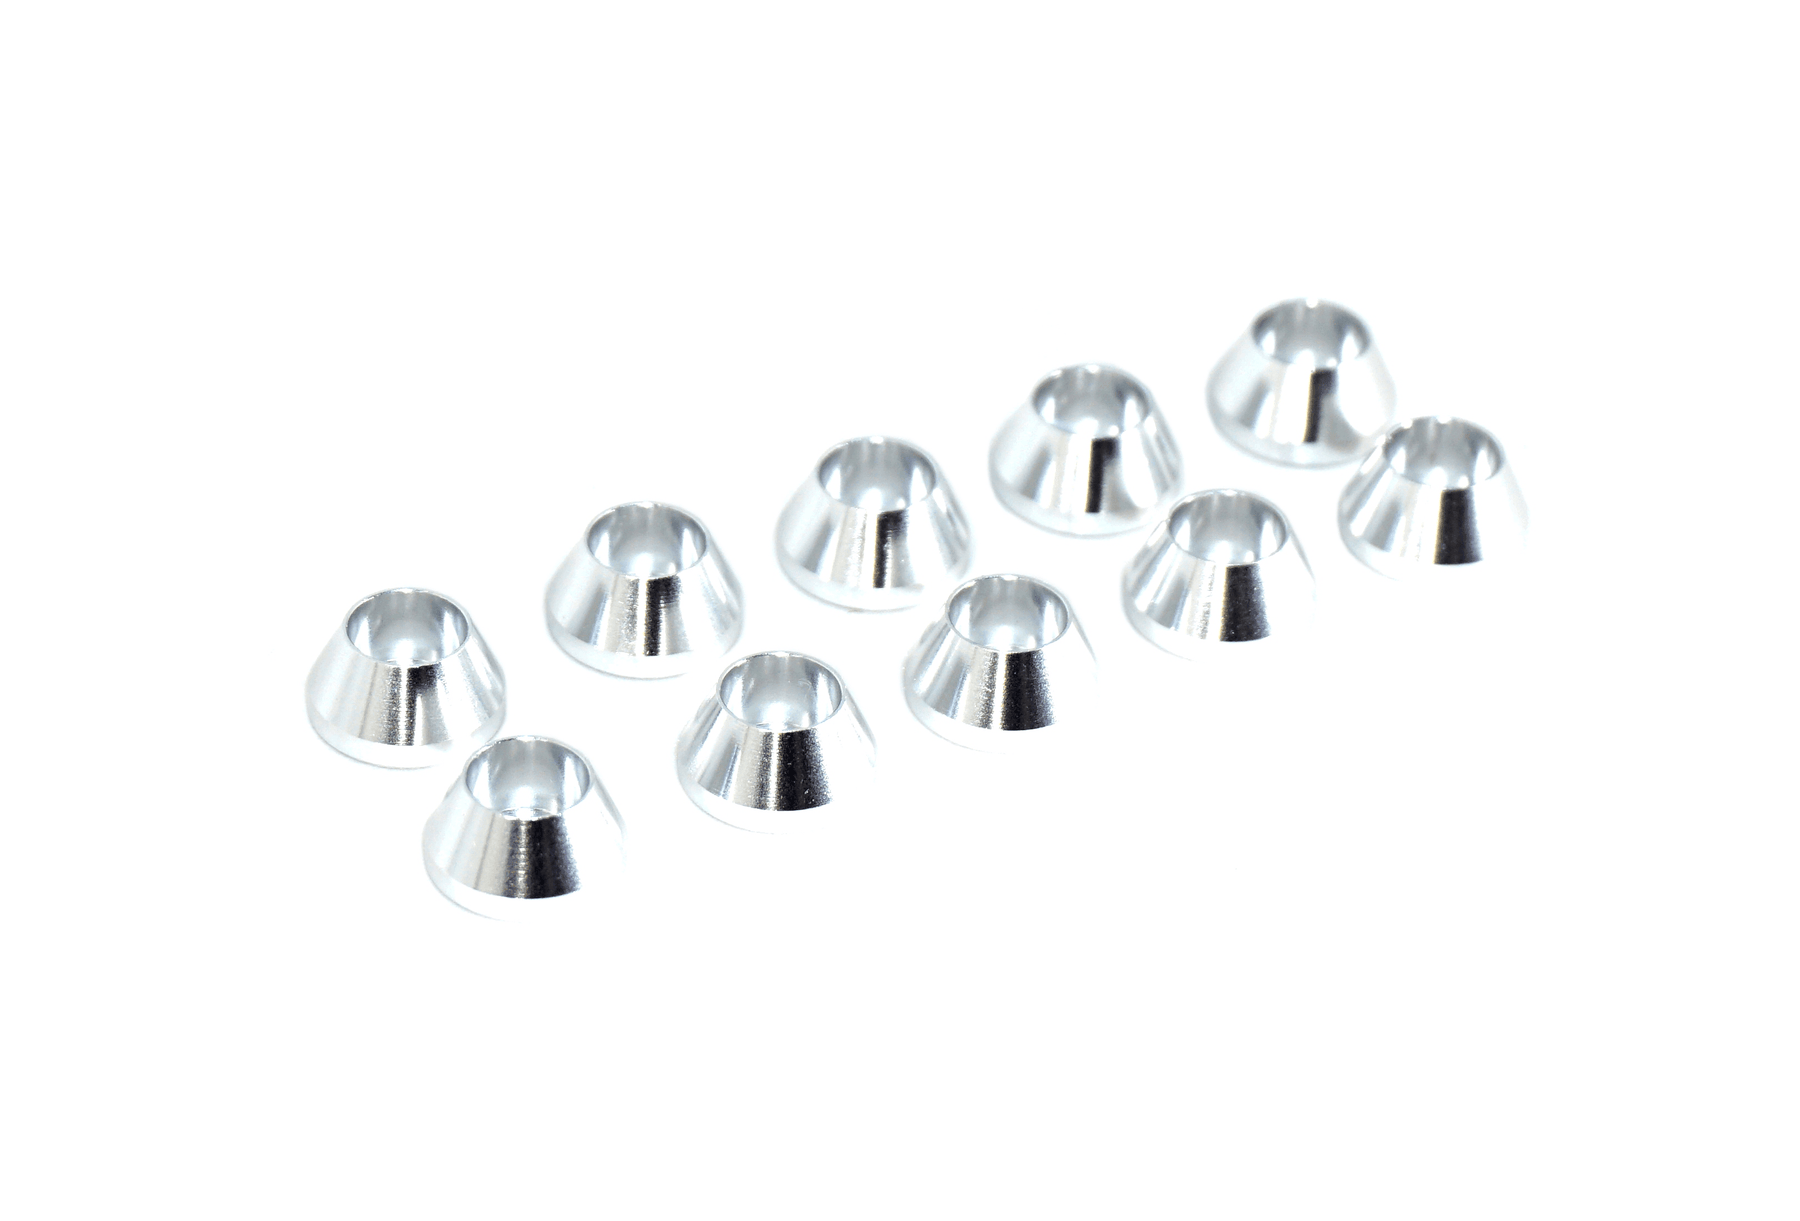 ZSPEC M2 Angled-Cup Finish Washers for SHSC Socket-Cap Fasteners, 10-Pack Billet Dress Up Bolts Fasteners Washers Red Blue Purple Gold Burned Black